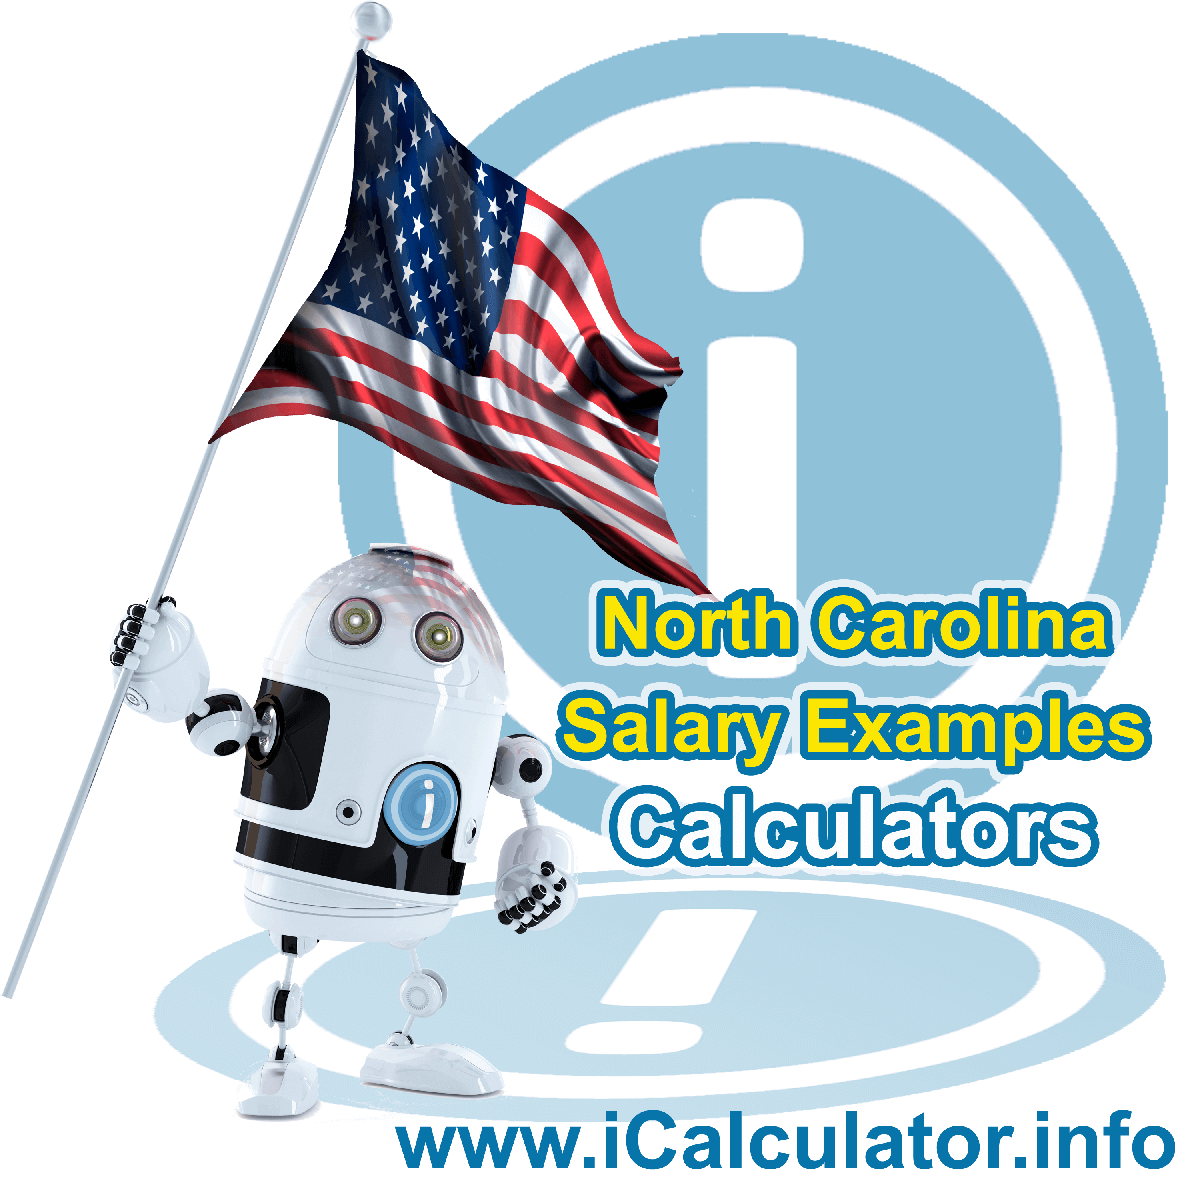 North Carolina Salary Example for $ 15,000.00 in 2023 | iCalculator™ | $ 15,000.00 salary example for employee and employer paying North Carolina State tincome taxes. Detailed salary after tax calculation including North Carolina State Tax, Federal State Tax, Medicare Deductions, Social Security, Capital Gains and other income tax and salary deductions complete with supporting North Carolina state tax tables 